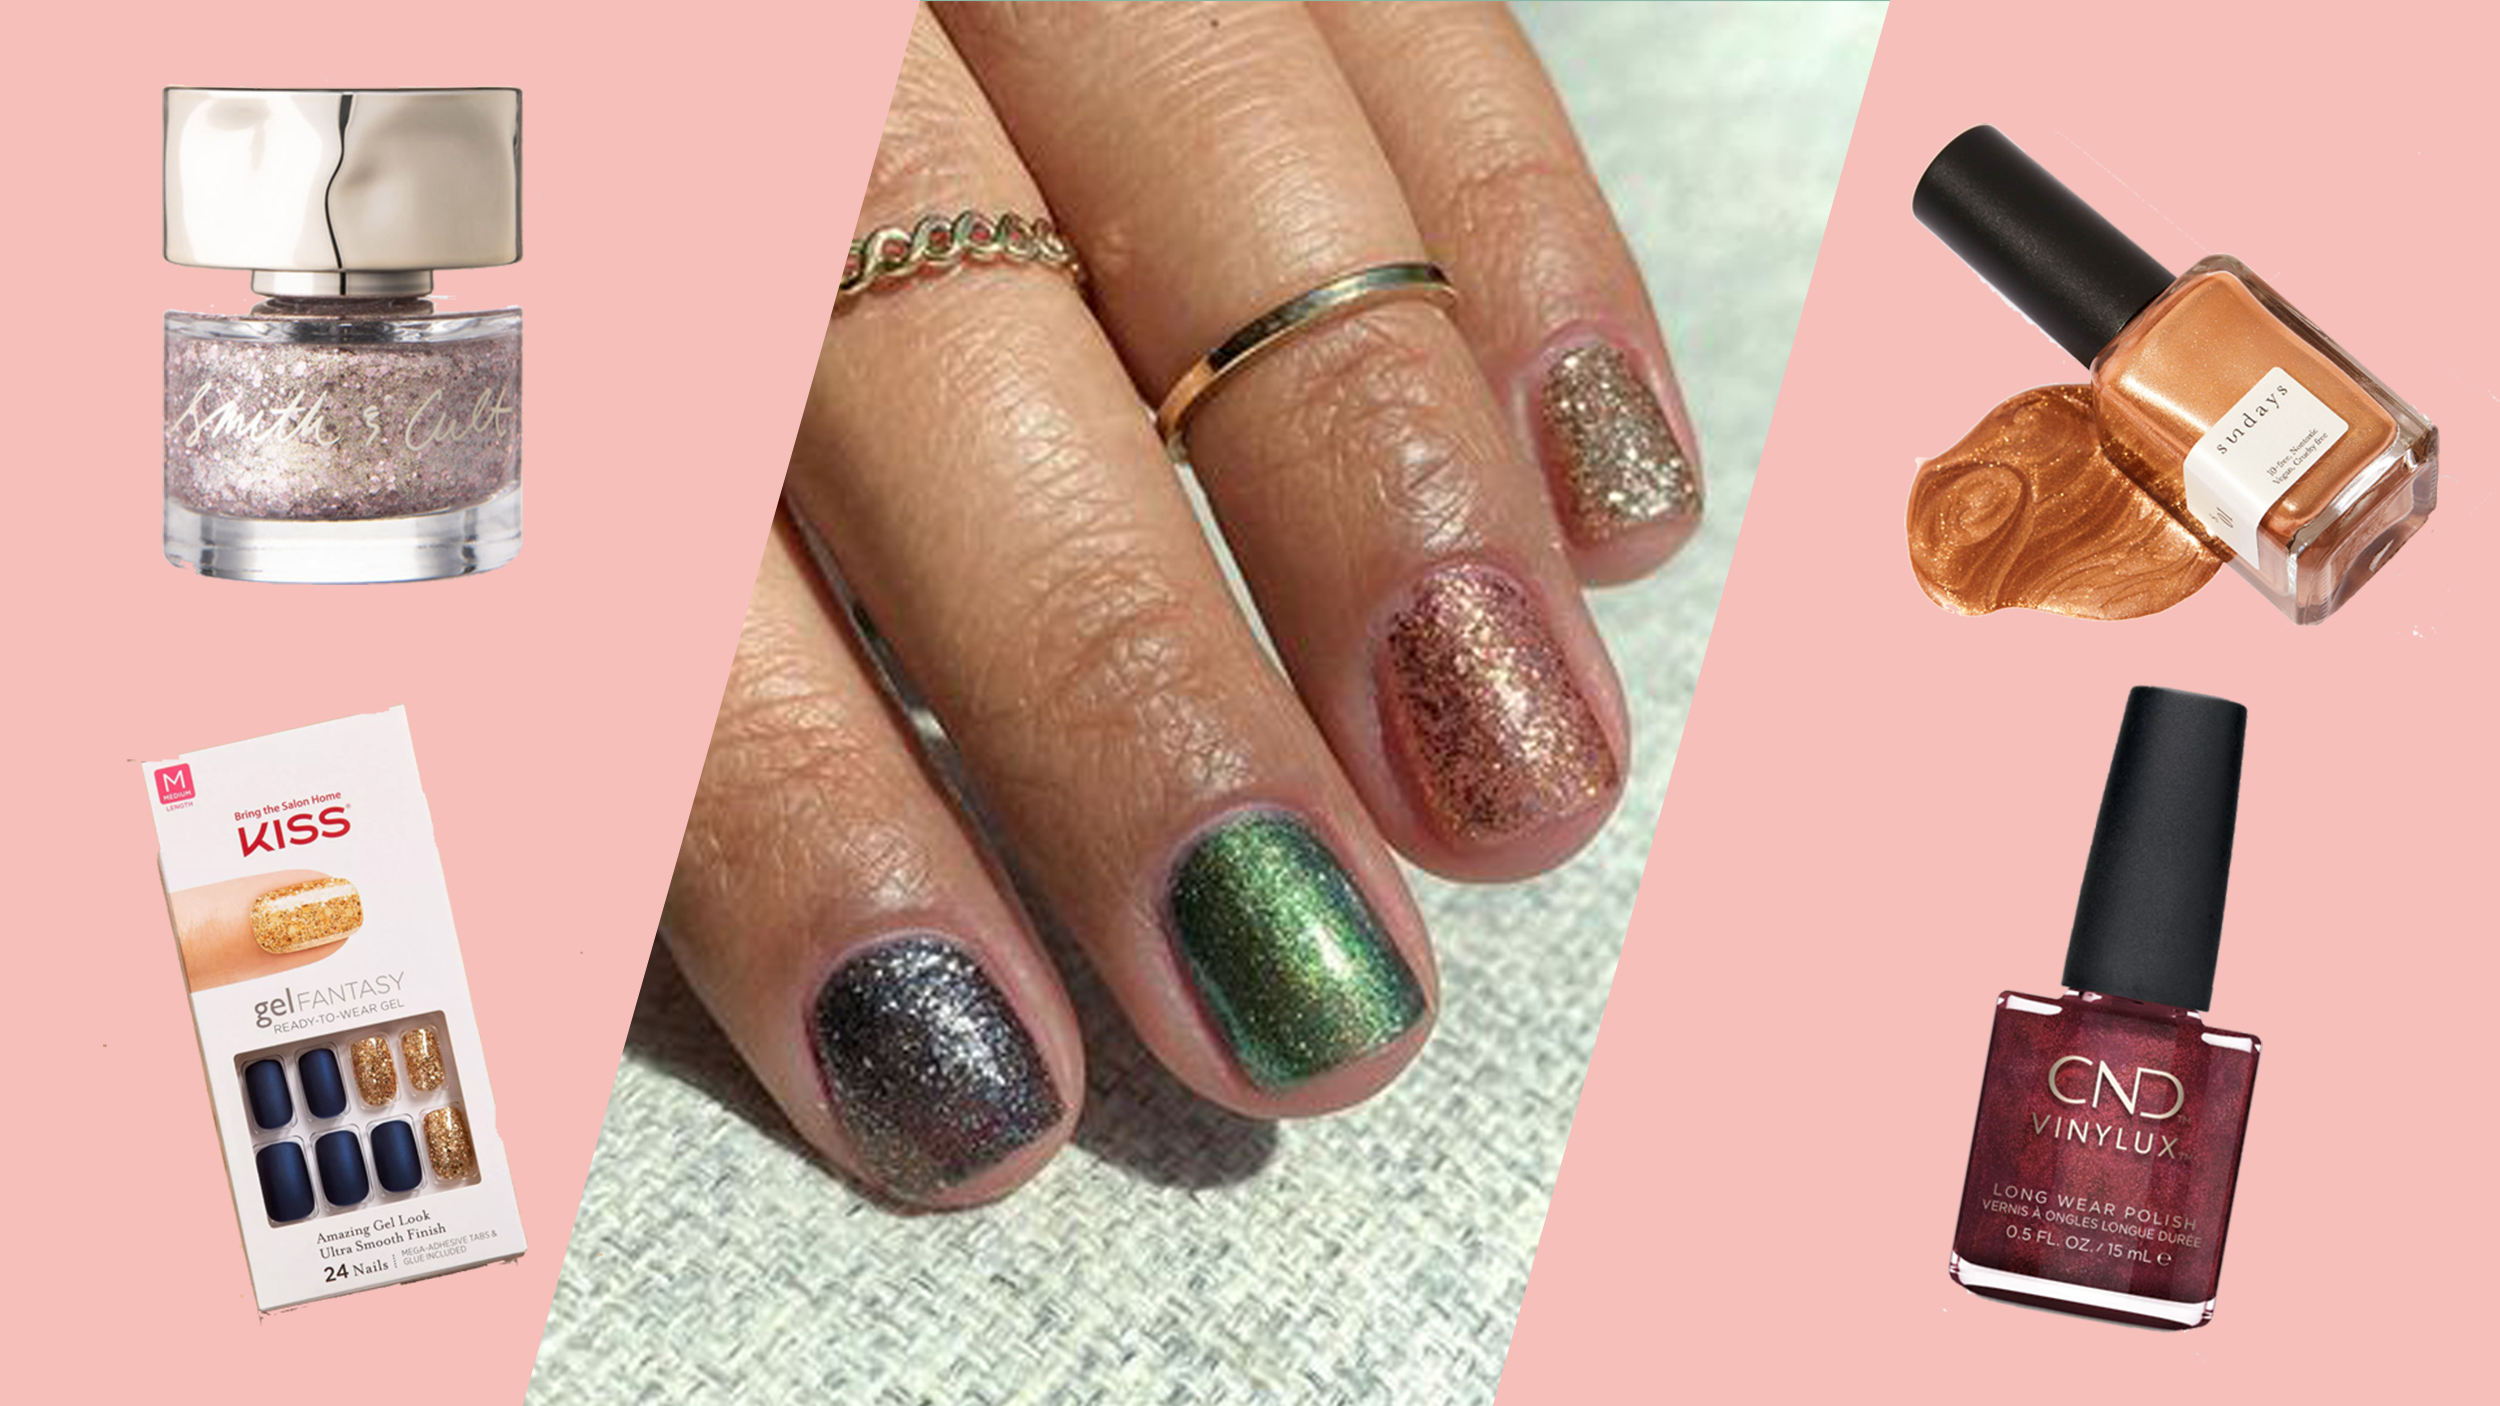 8. Exotic Nail Designs for the New Year - wide 3